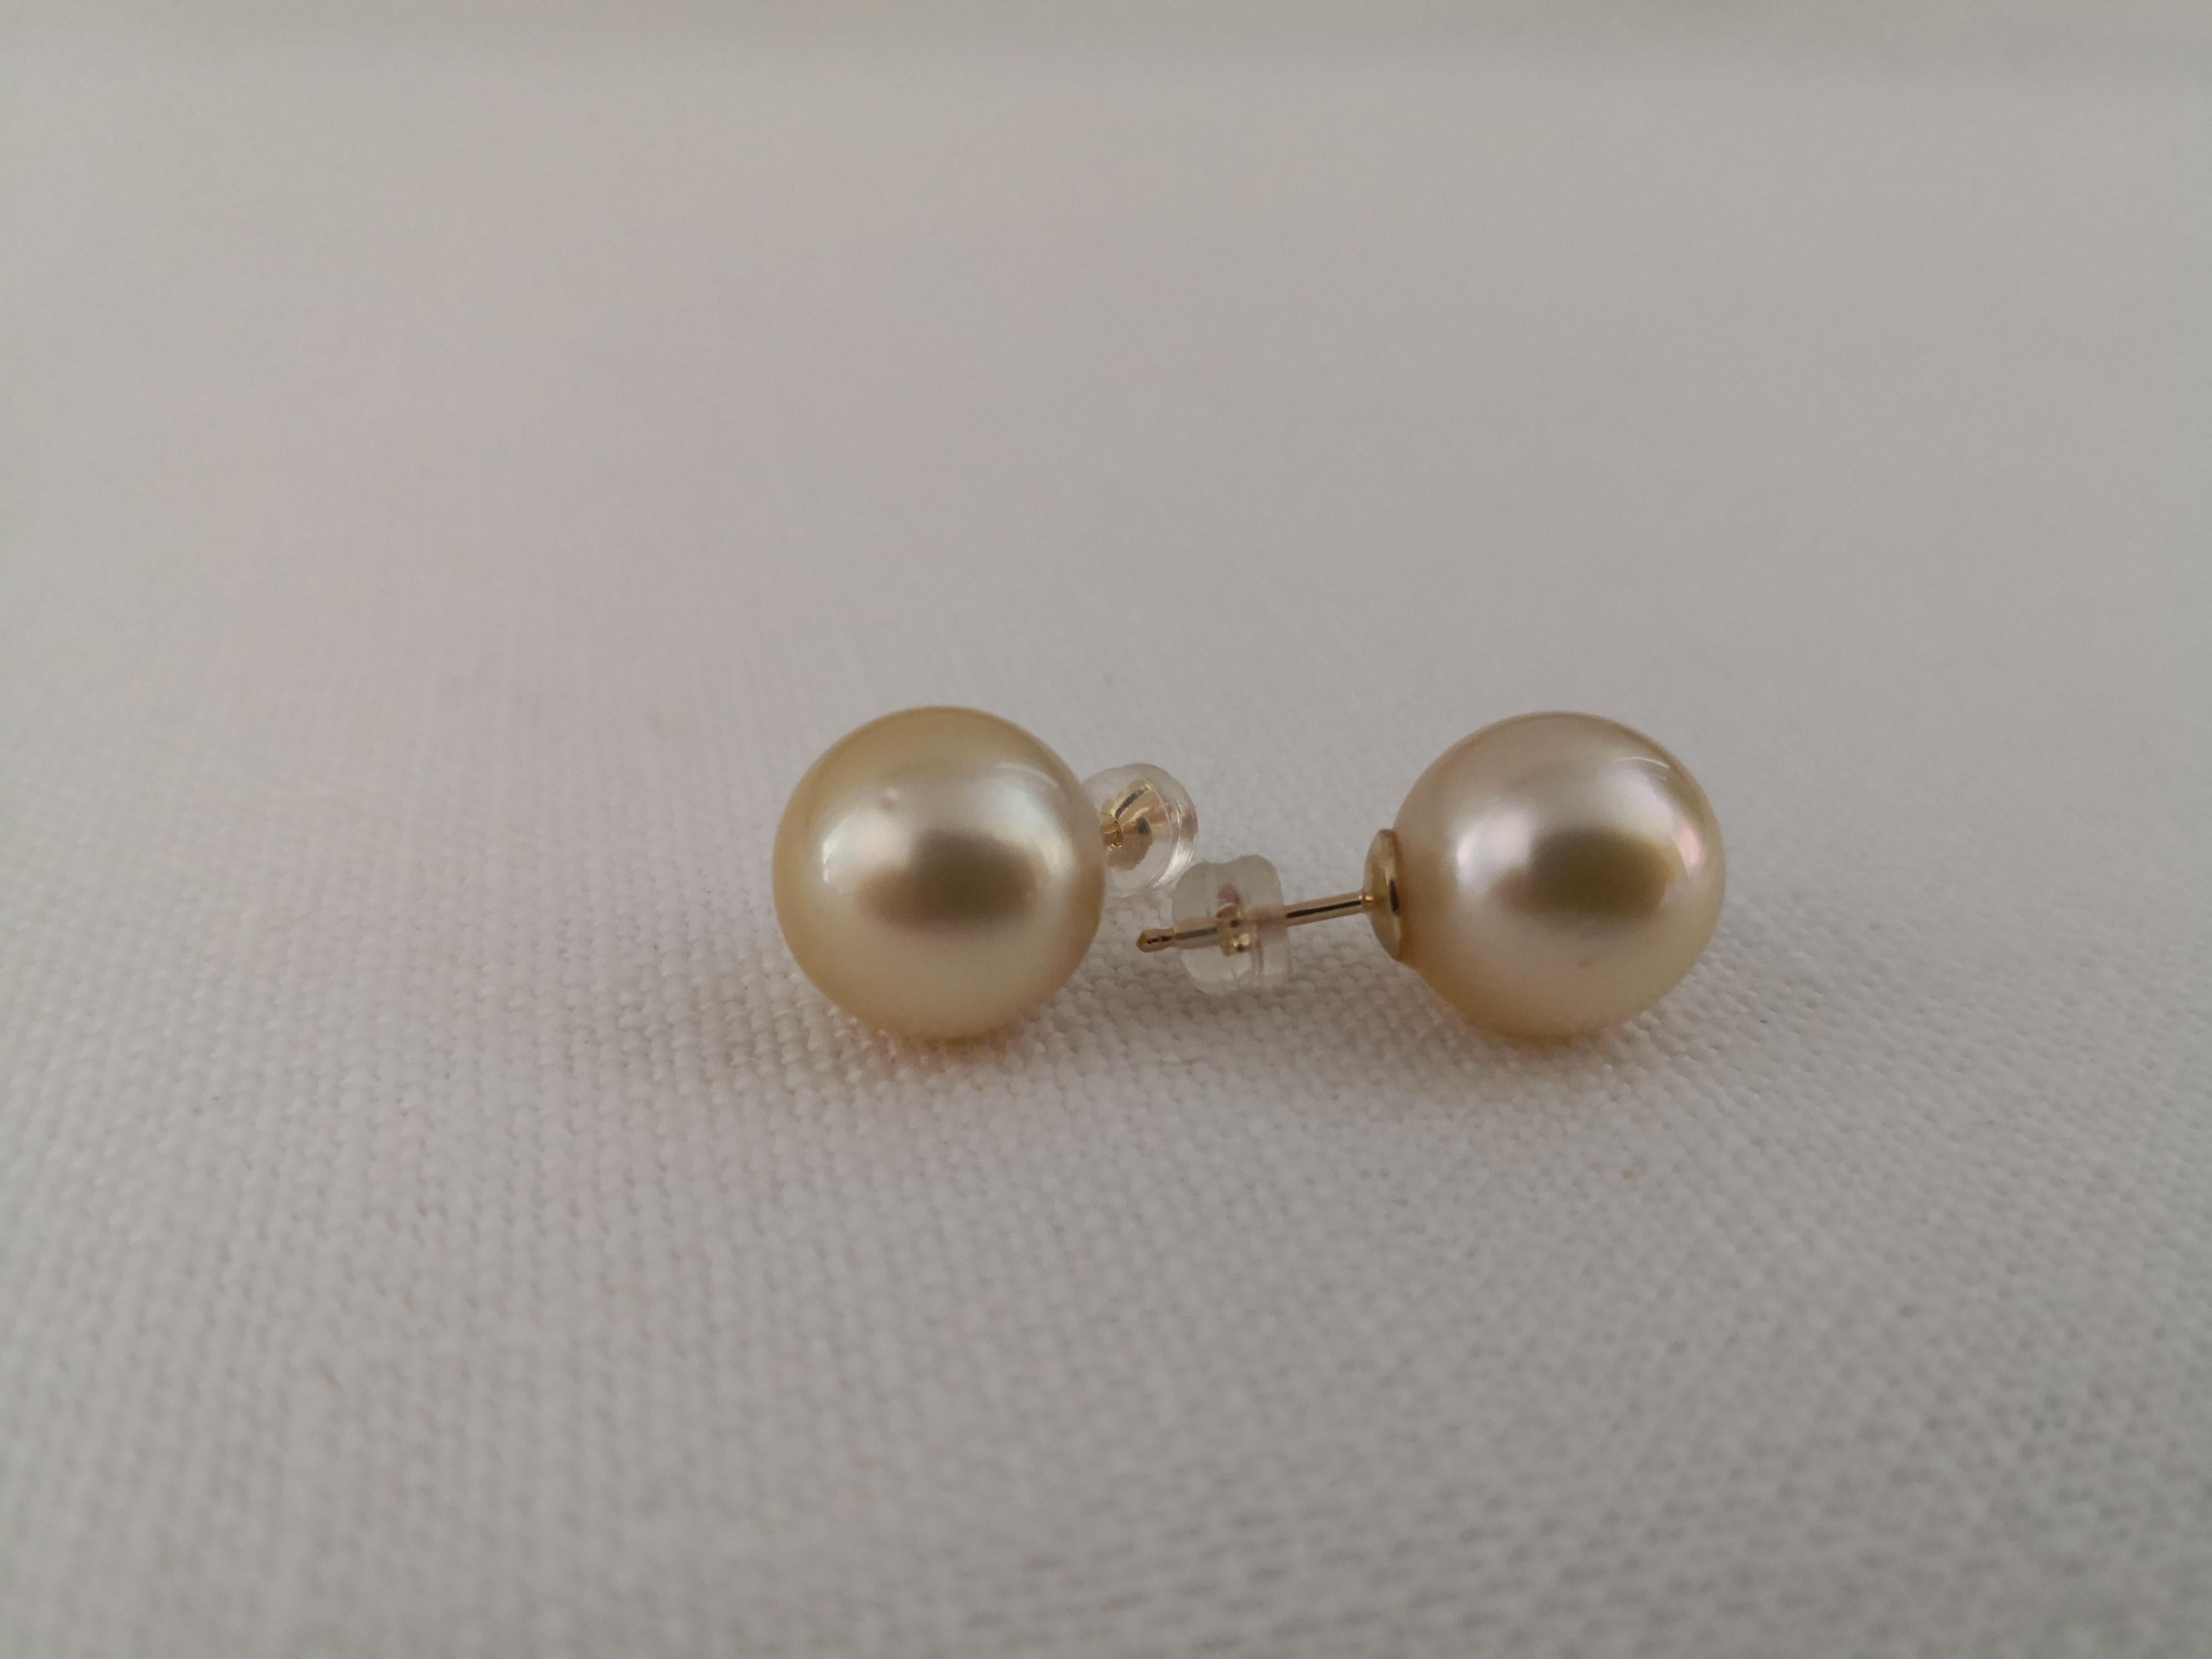 - Natural Color South Sea Pearls earrings

- Origin:  Indonesia ocean waters

- Produced by Pinctada Maxima Oyster

- High-Quality Pearls

- 18K Yellow Gold mounting

- Size of Pearls 12 mm of diameter

- Pearls of round shape

- Very High natural